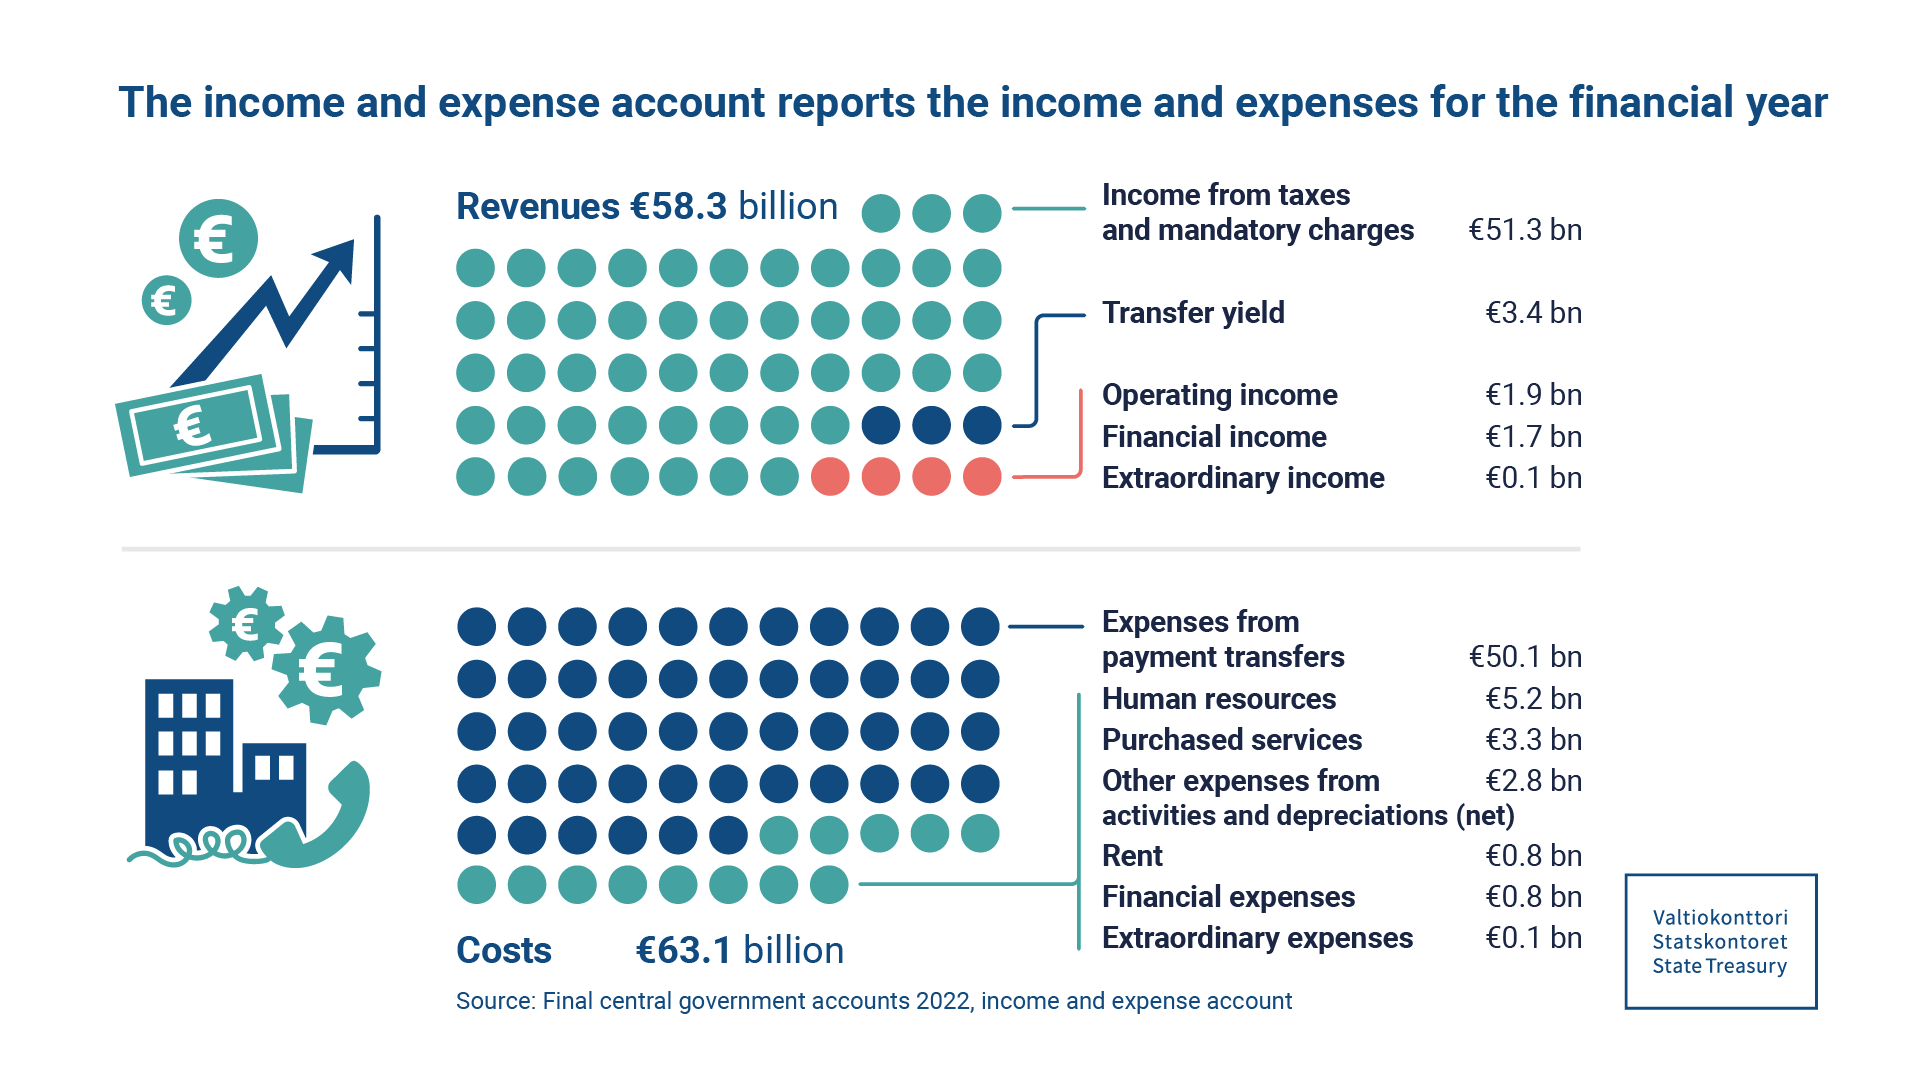 The income and expense account reports in the income and expenses for the financial year